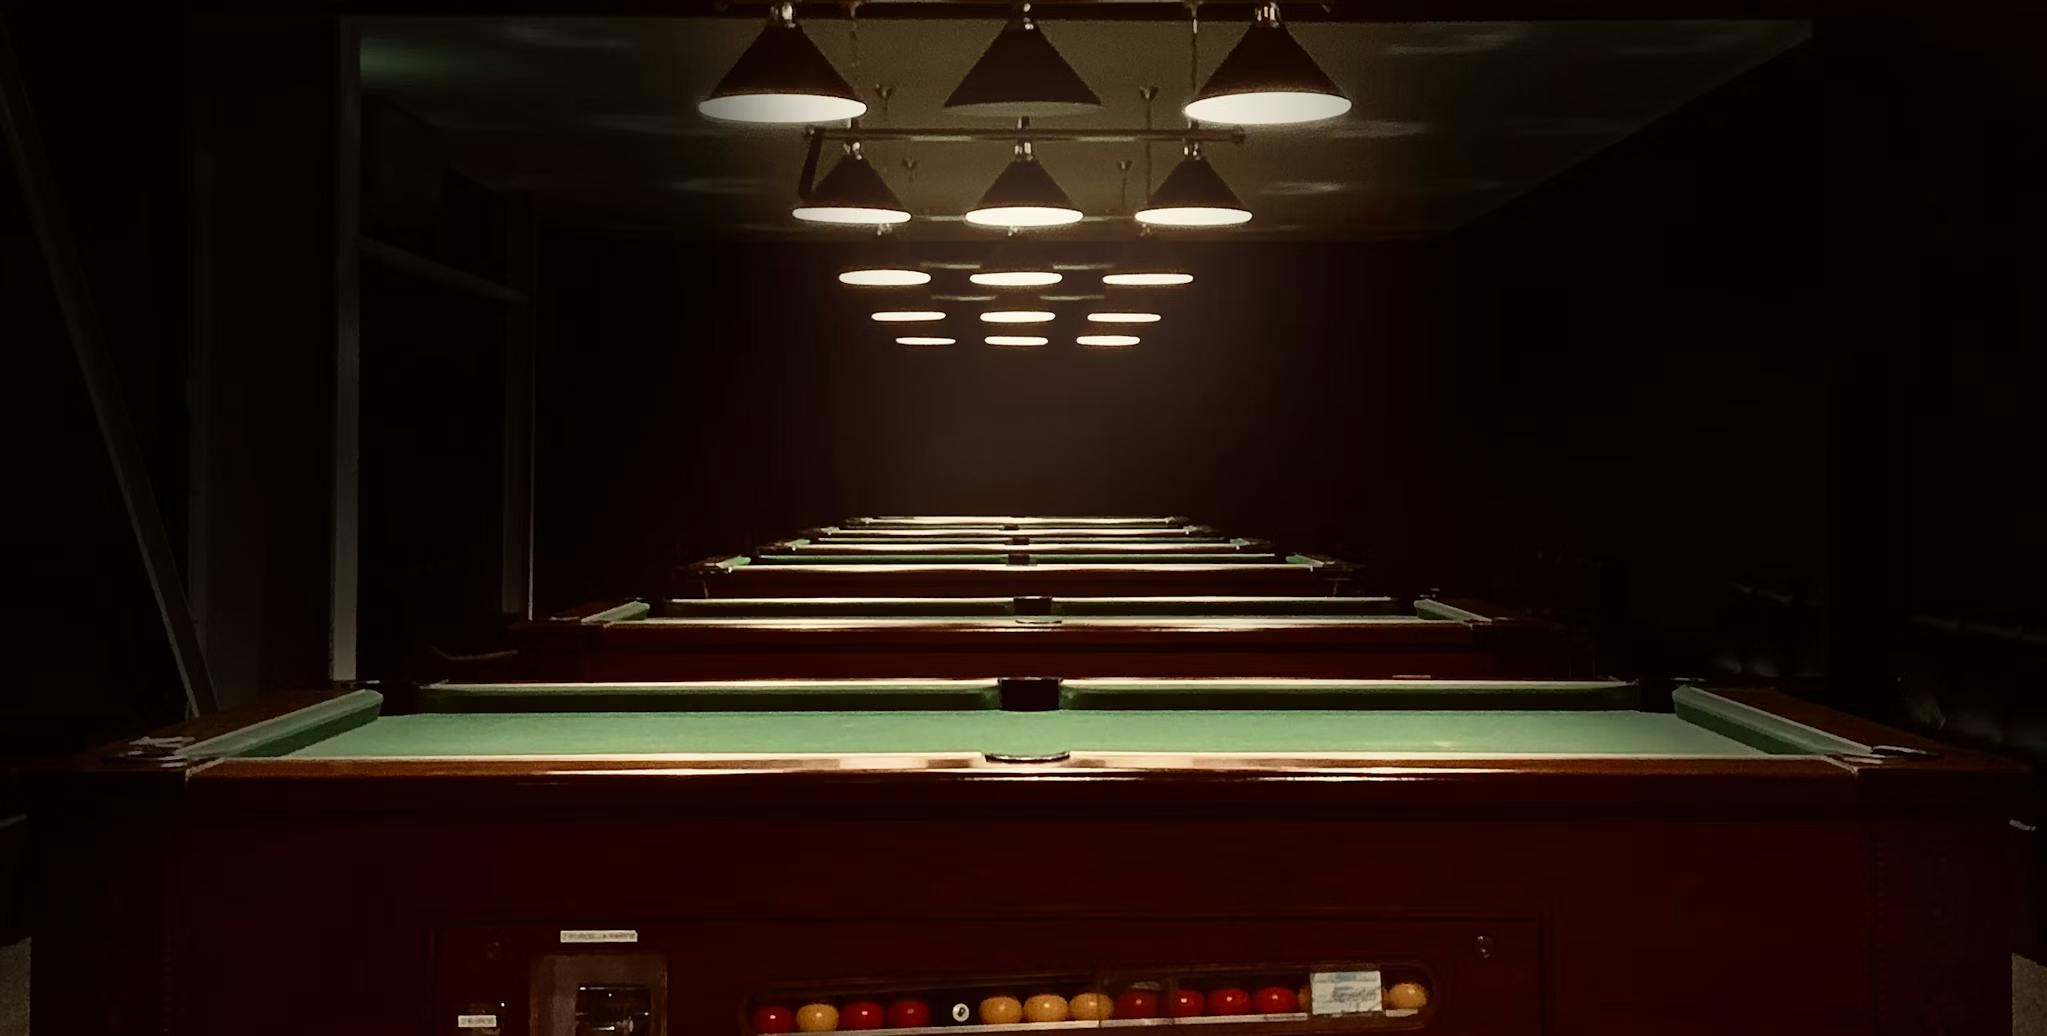 Snooker tables 